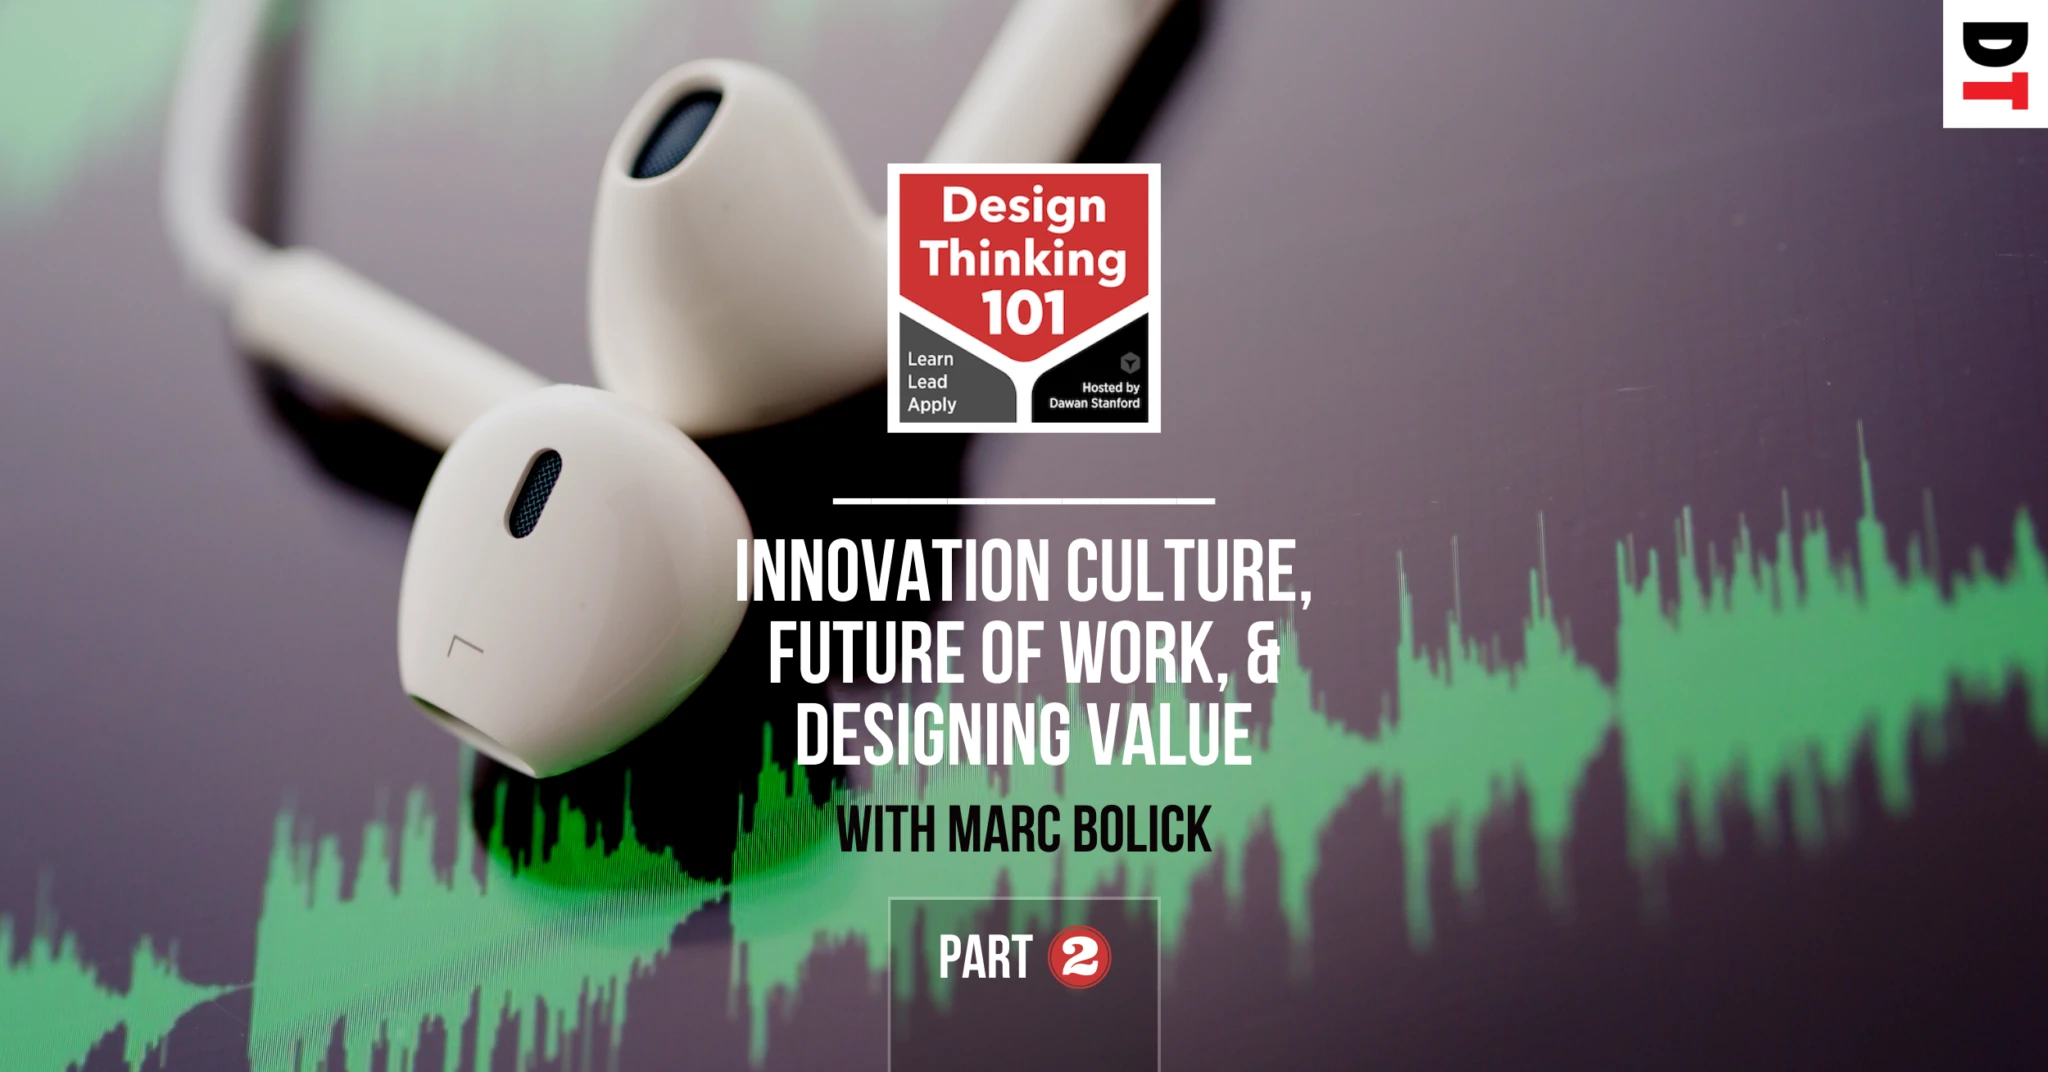 Interview: Innovation Culture, Future of Work, Designing Value—Part 2